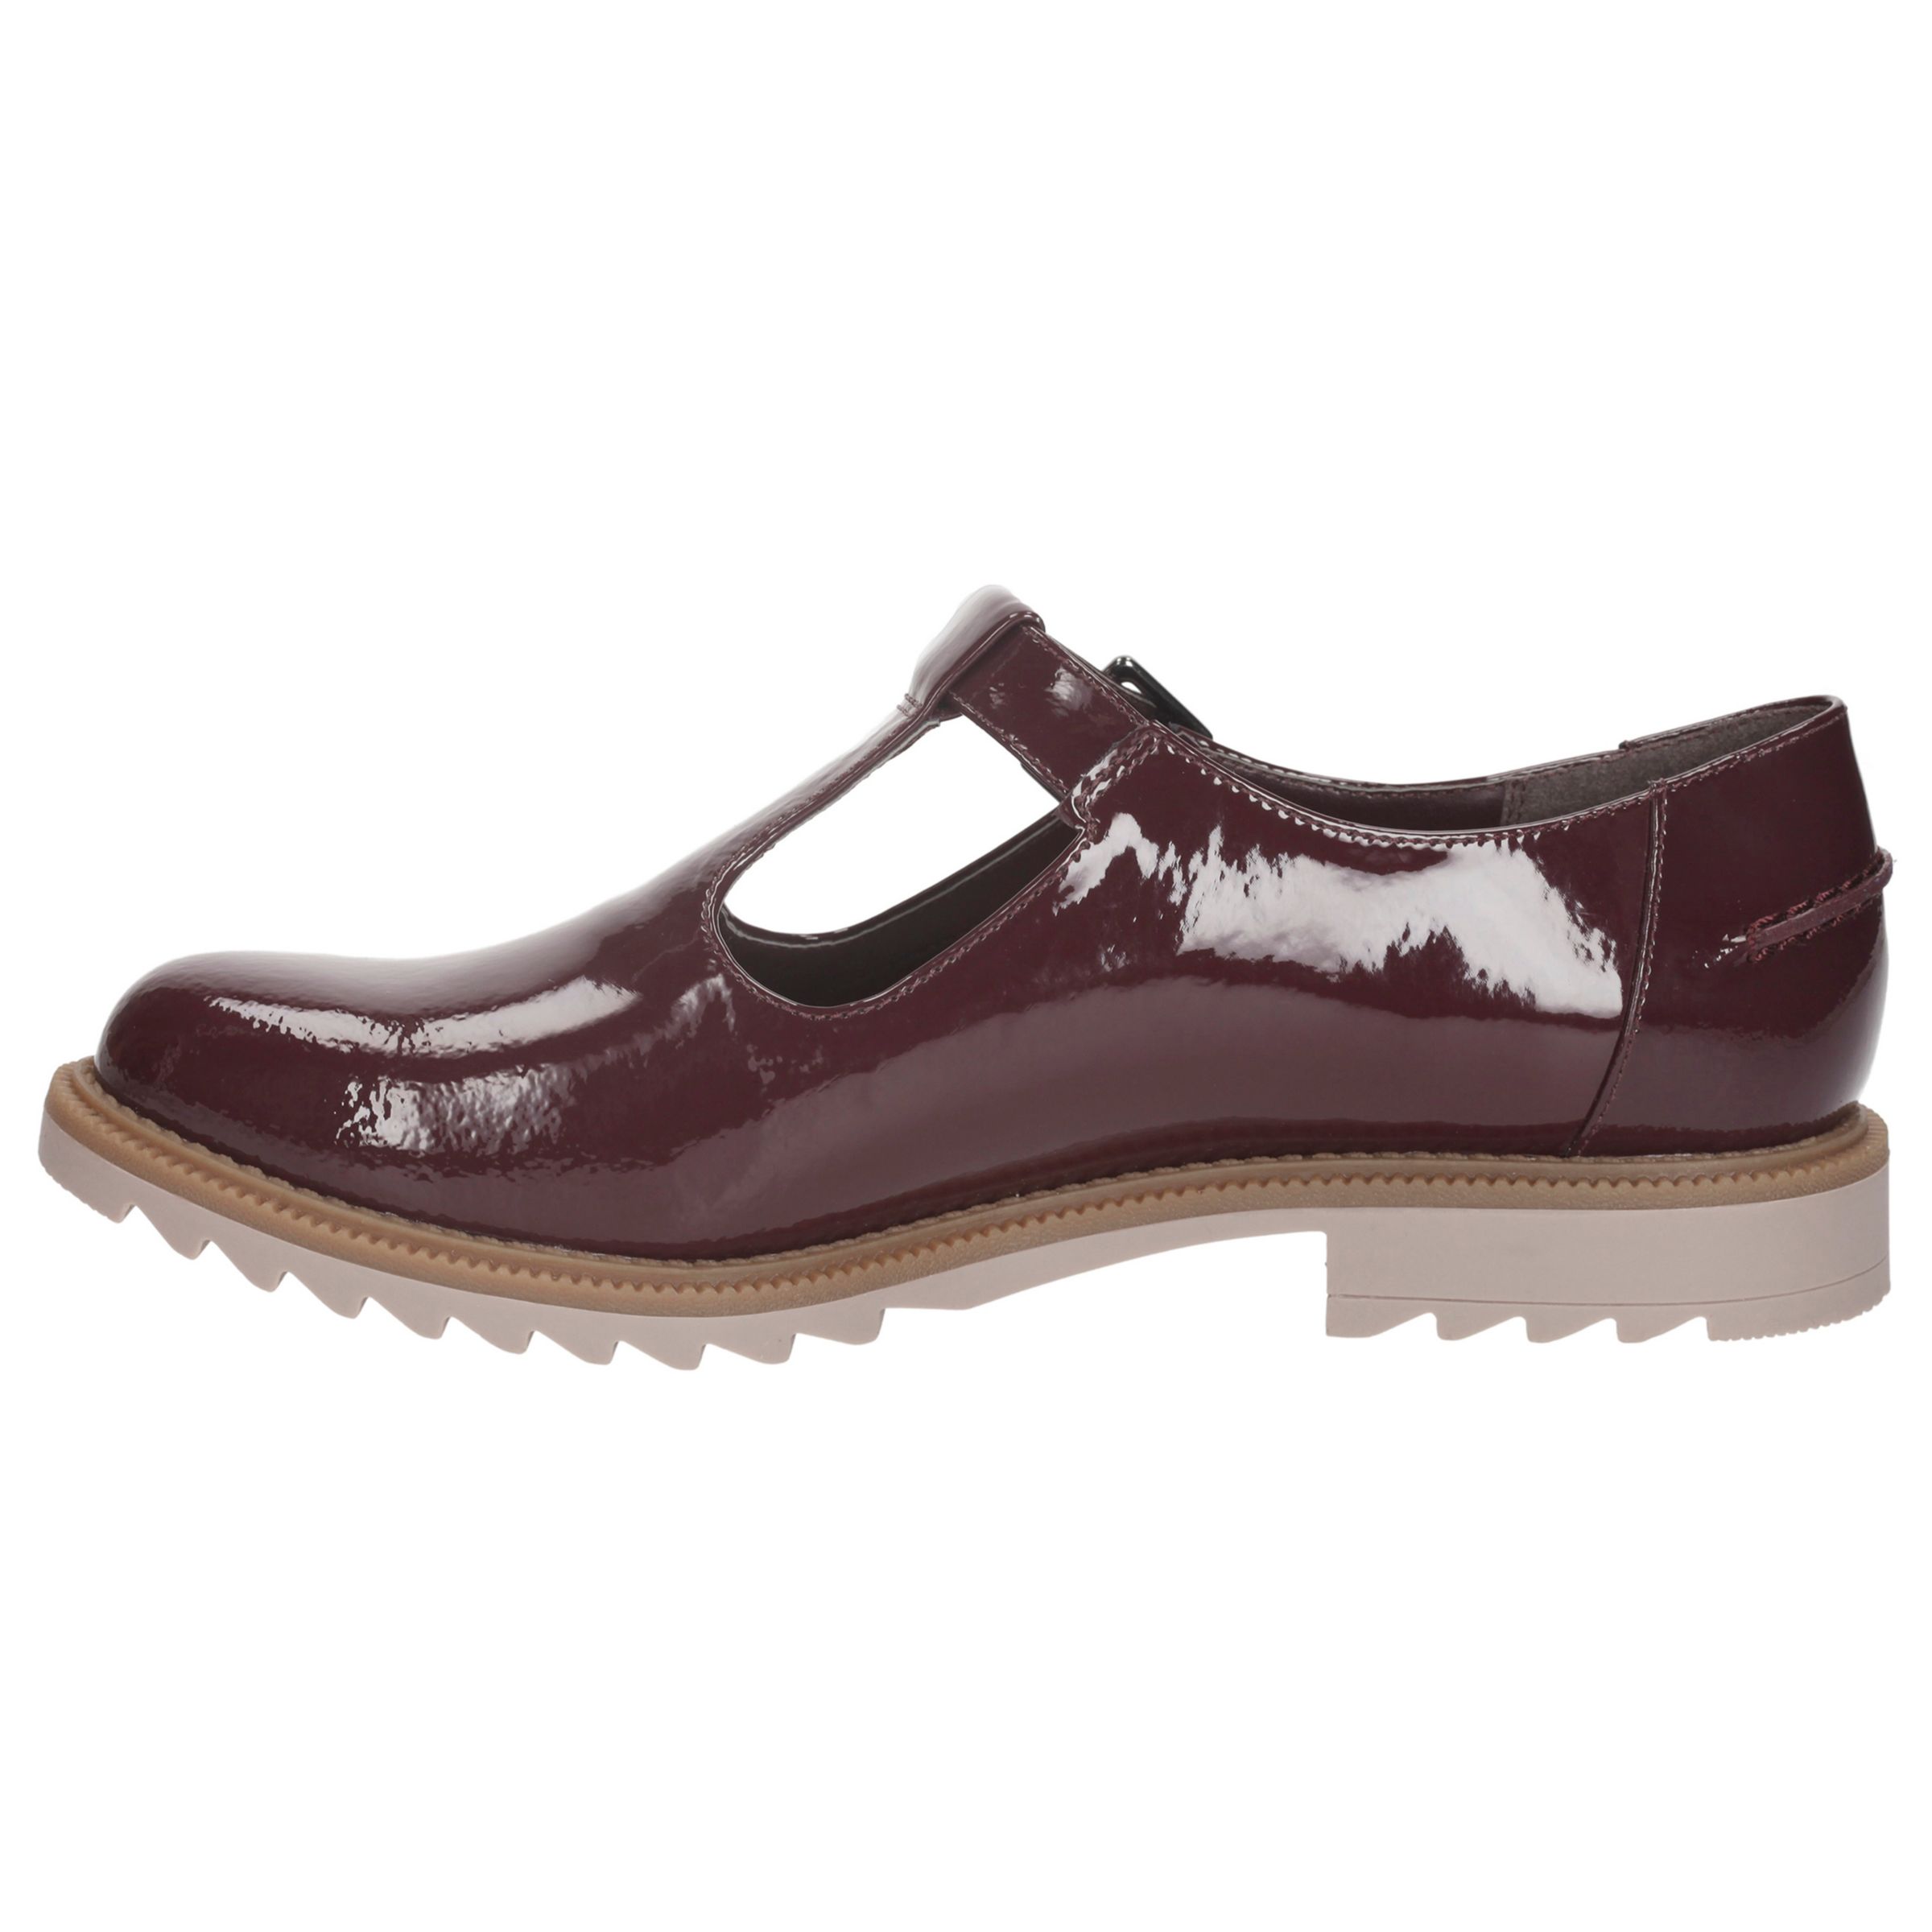 clarks griffin monty patent leather shoes